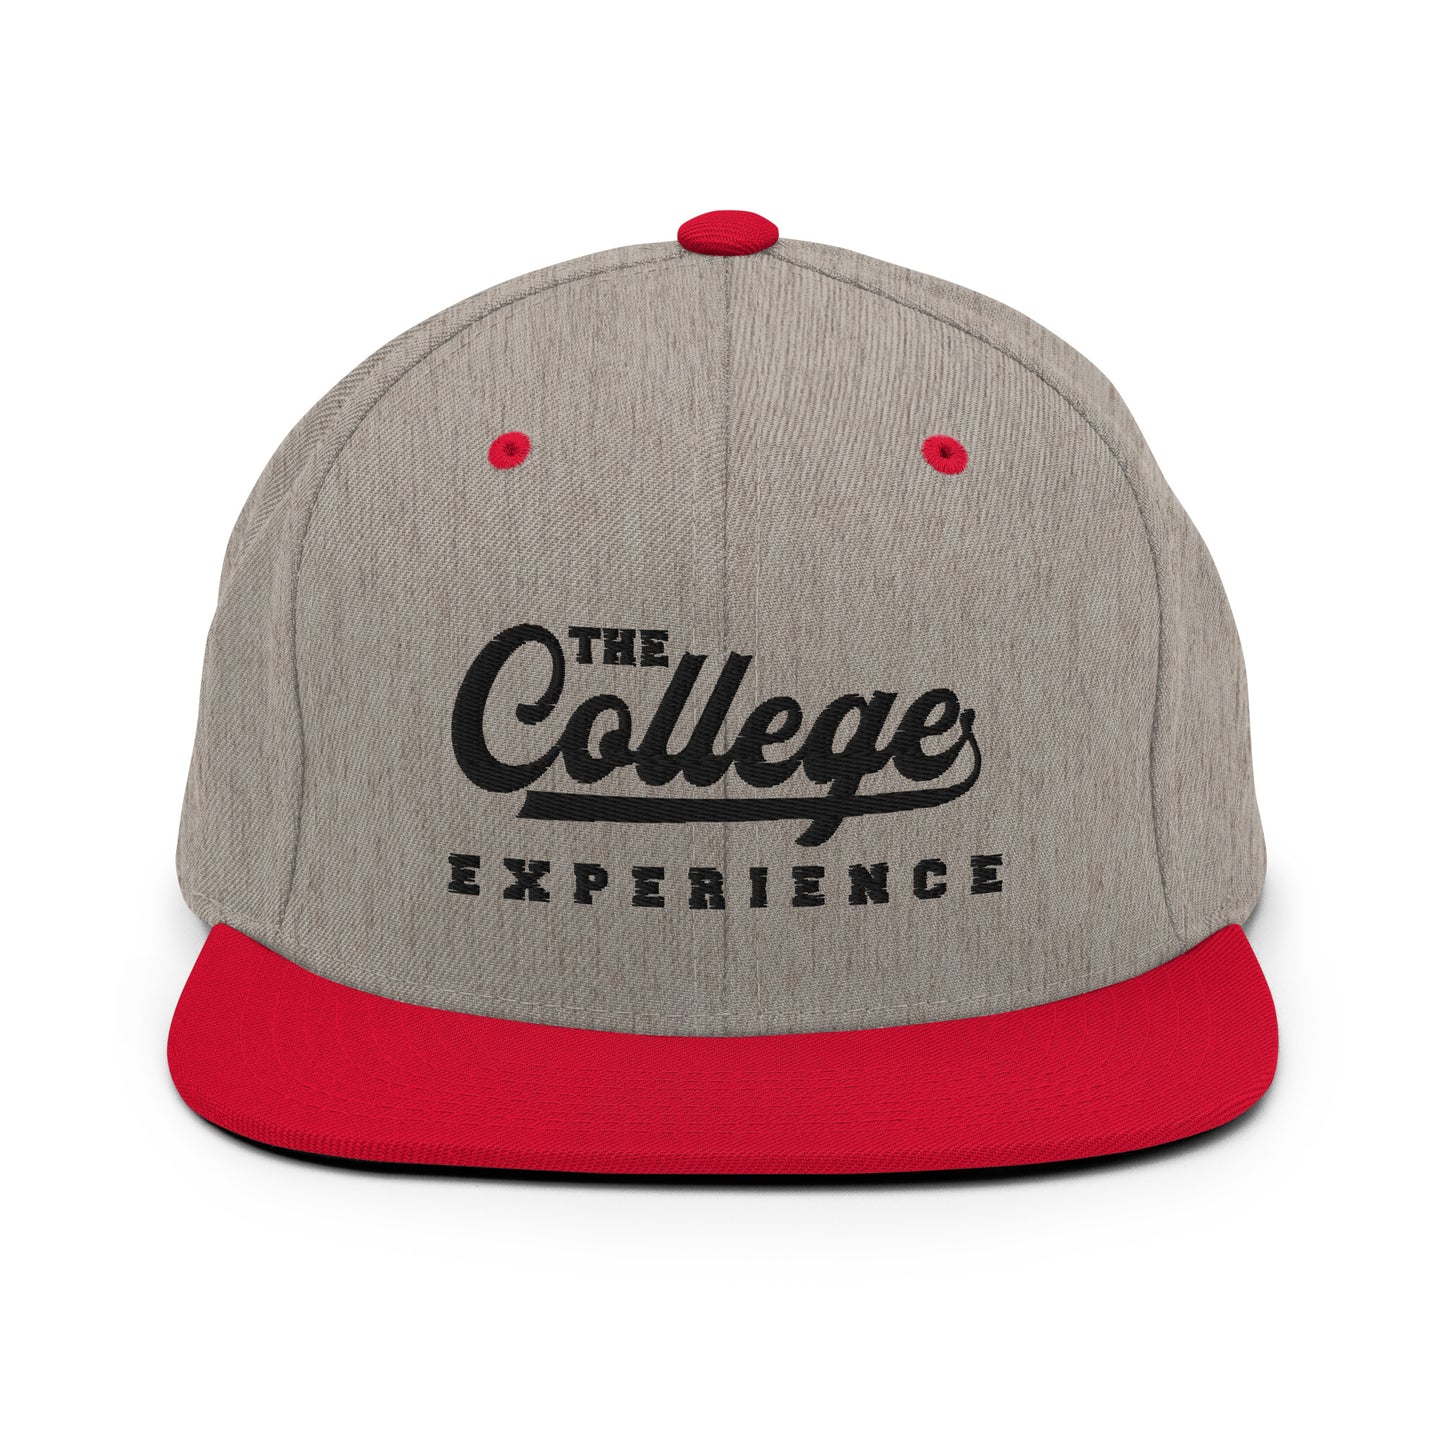 The College Experience - Snapback Hat (Black Logo)